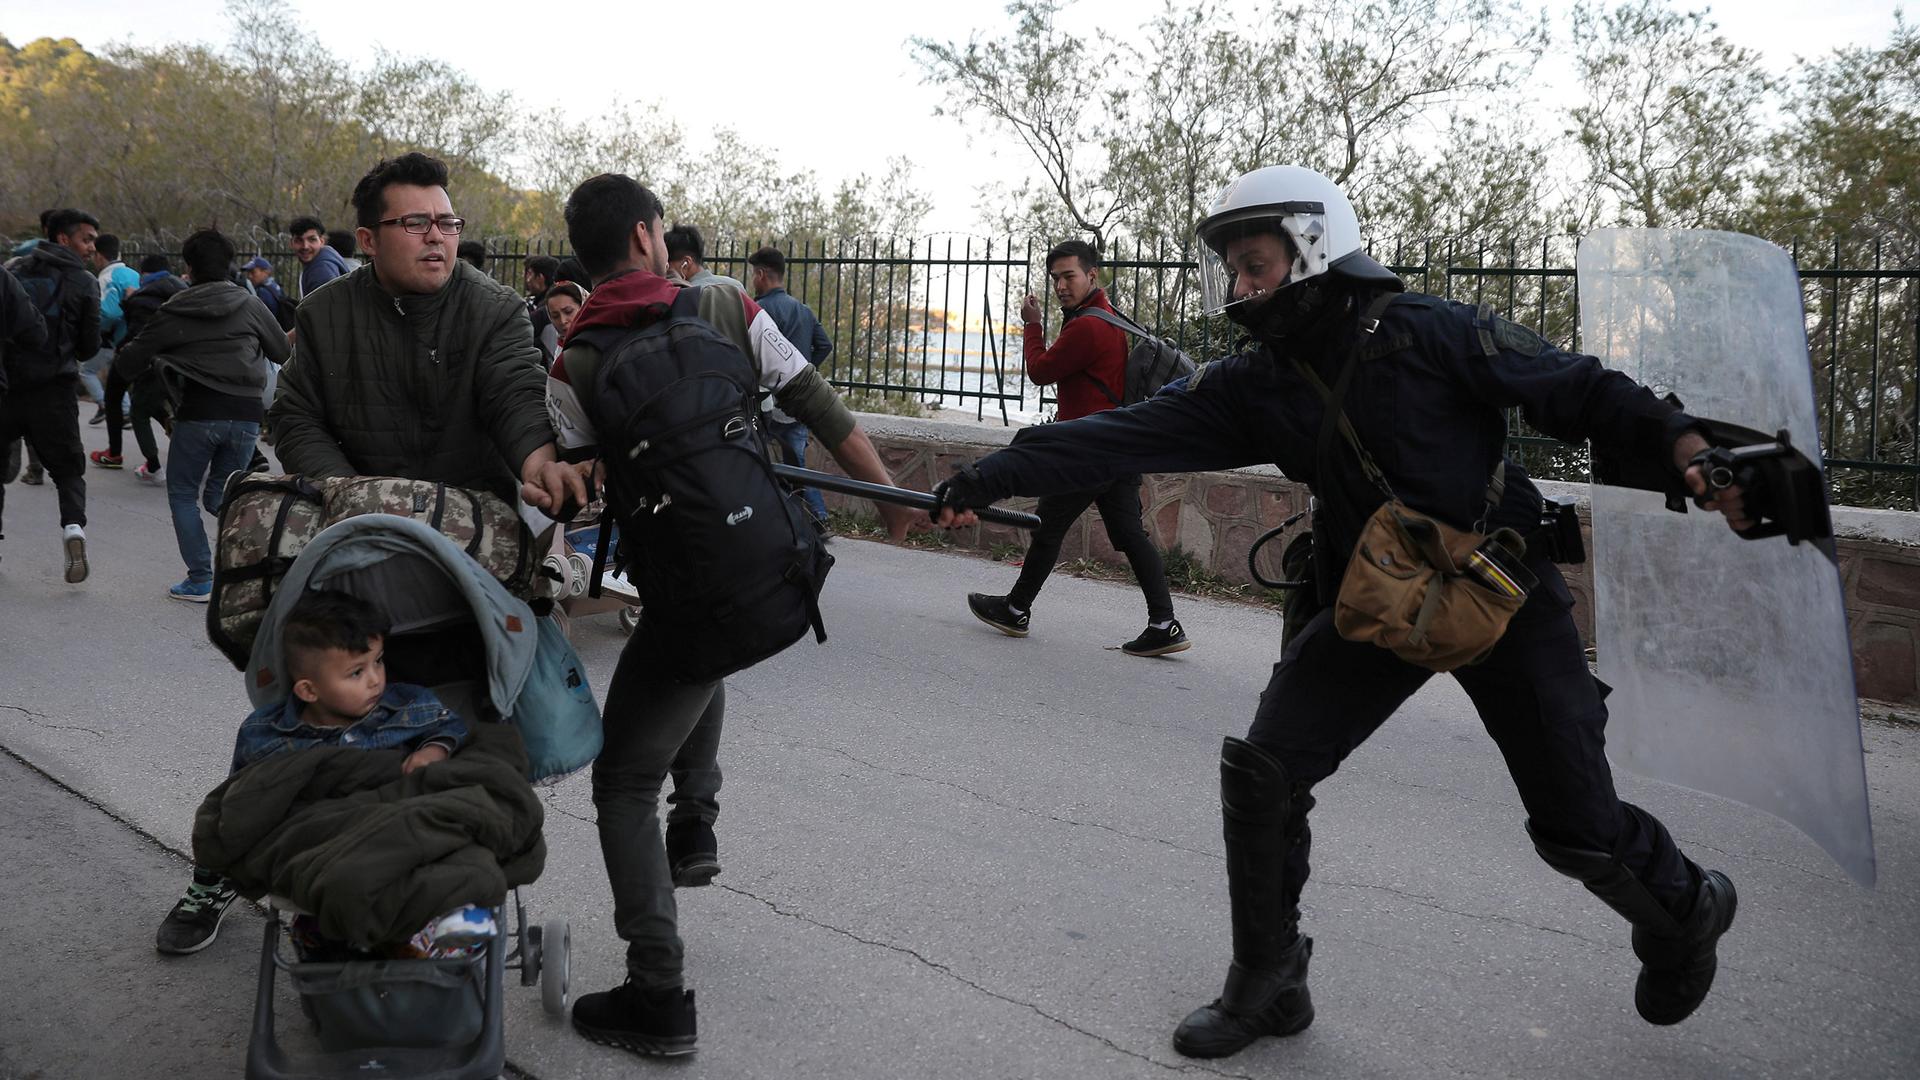 A riot police officer hits a migrant with his baton as police tries to disperse a group of migrants outside the port of Mytilene, Greece, March 3, 2020.